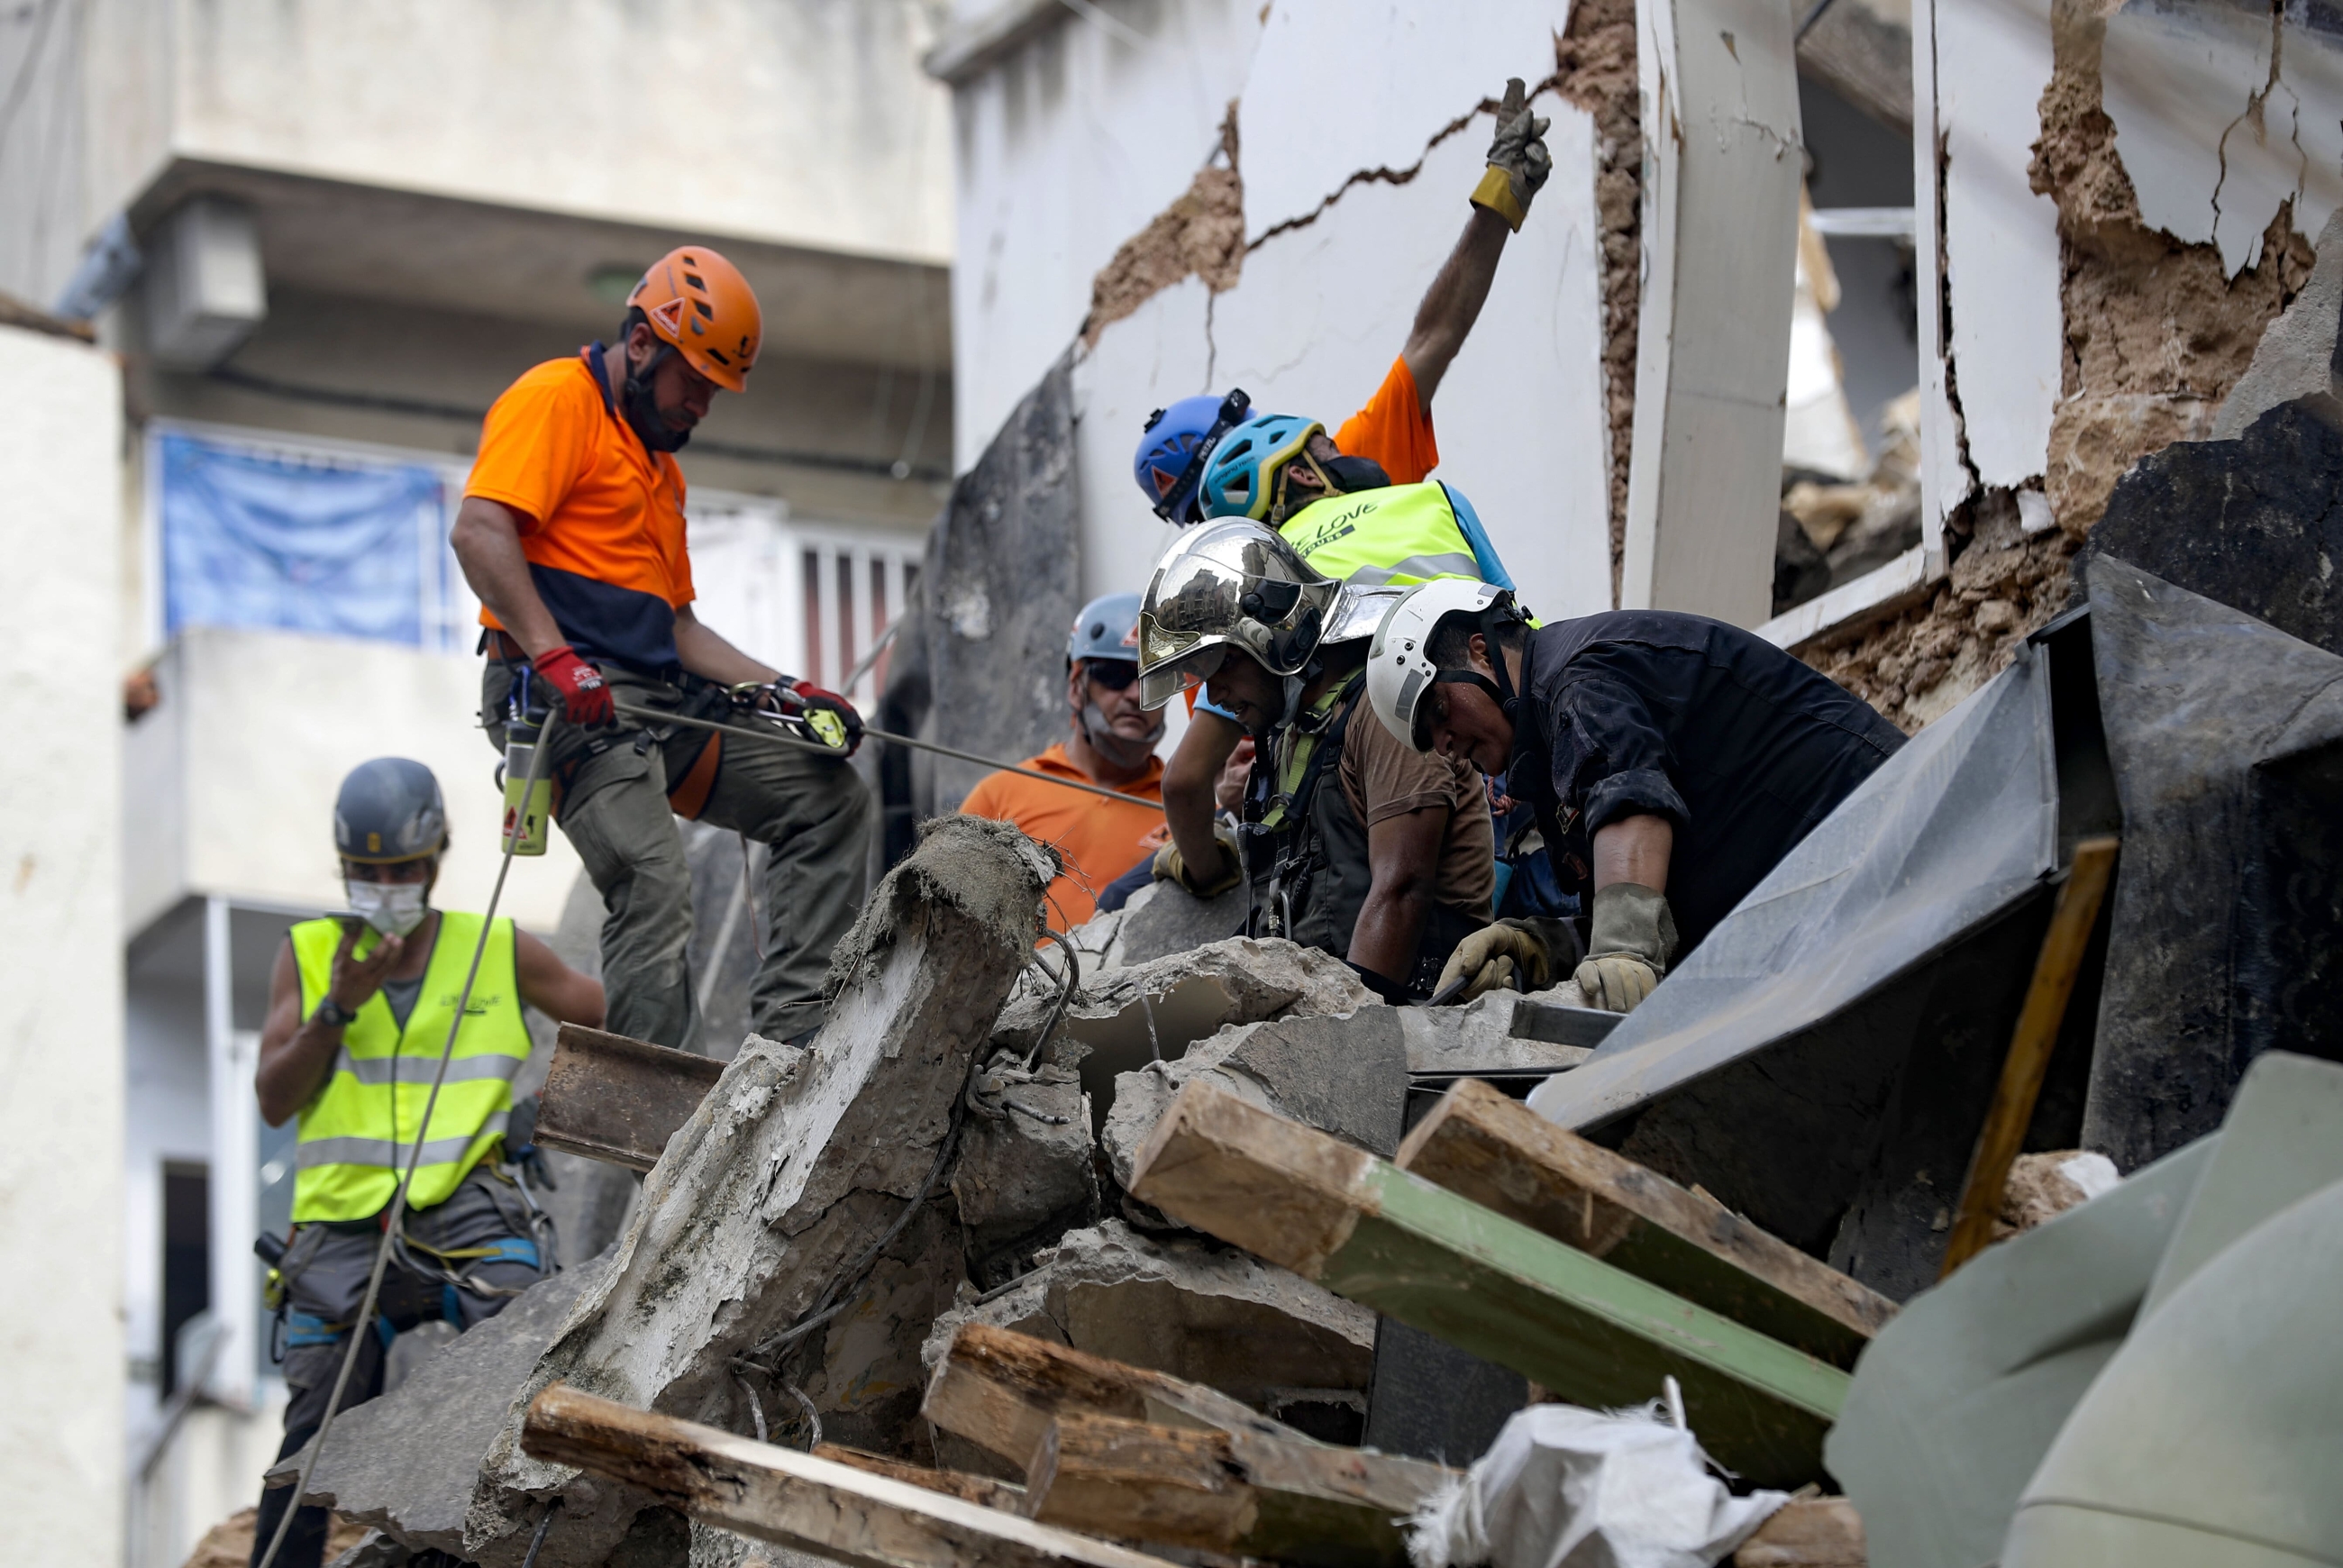 Rescue workers dig through the rubble of a badly damaged building in Beirut's Gemmayzeh district